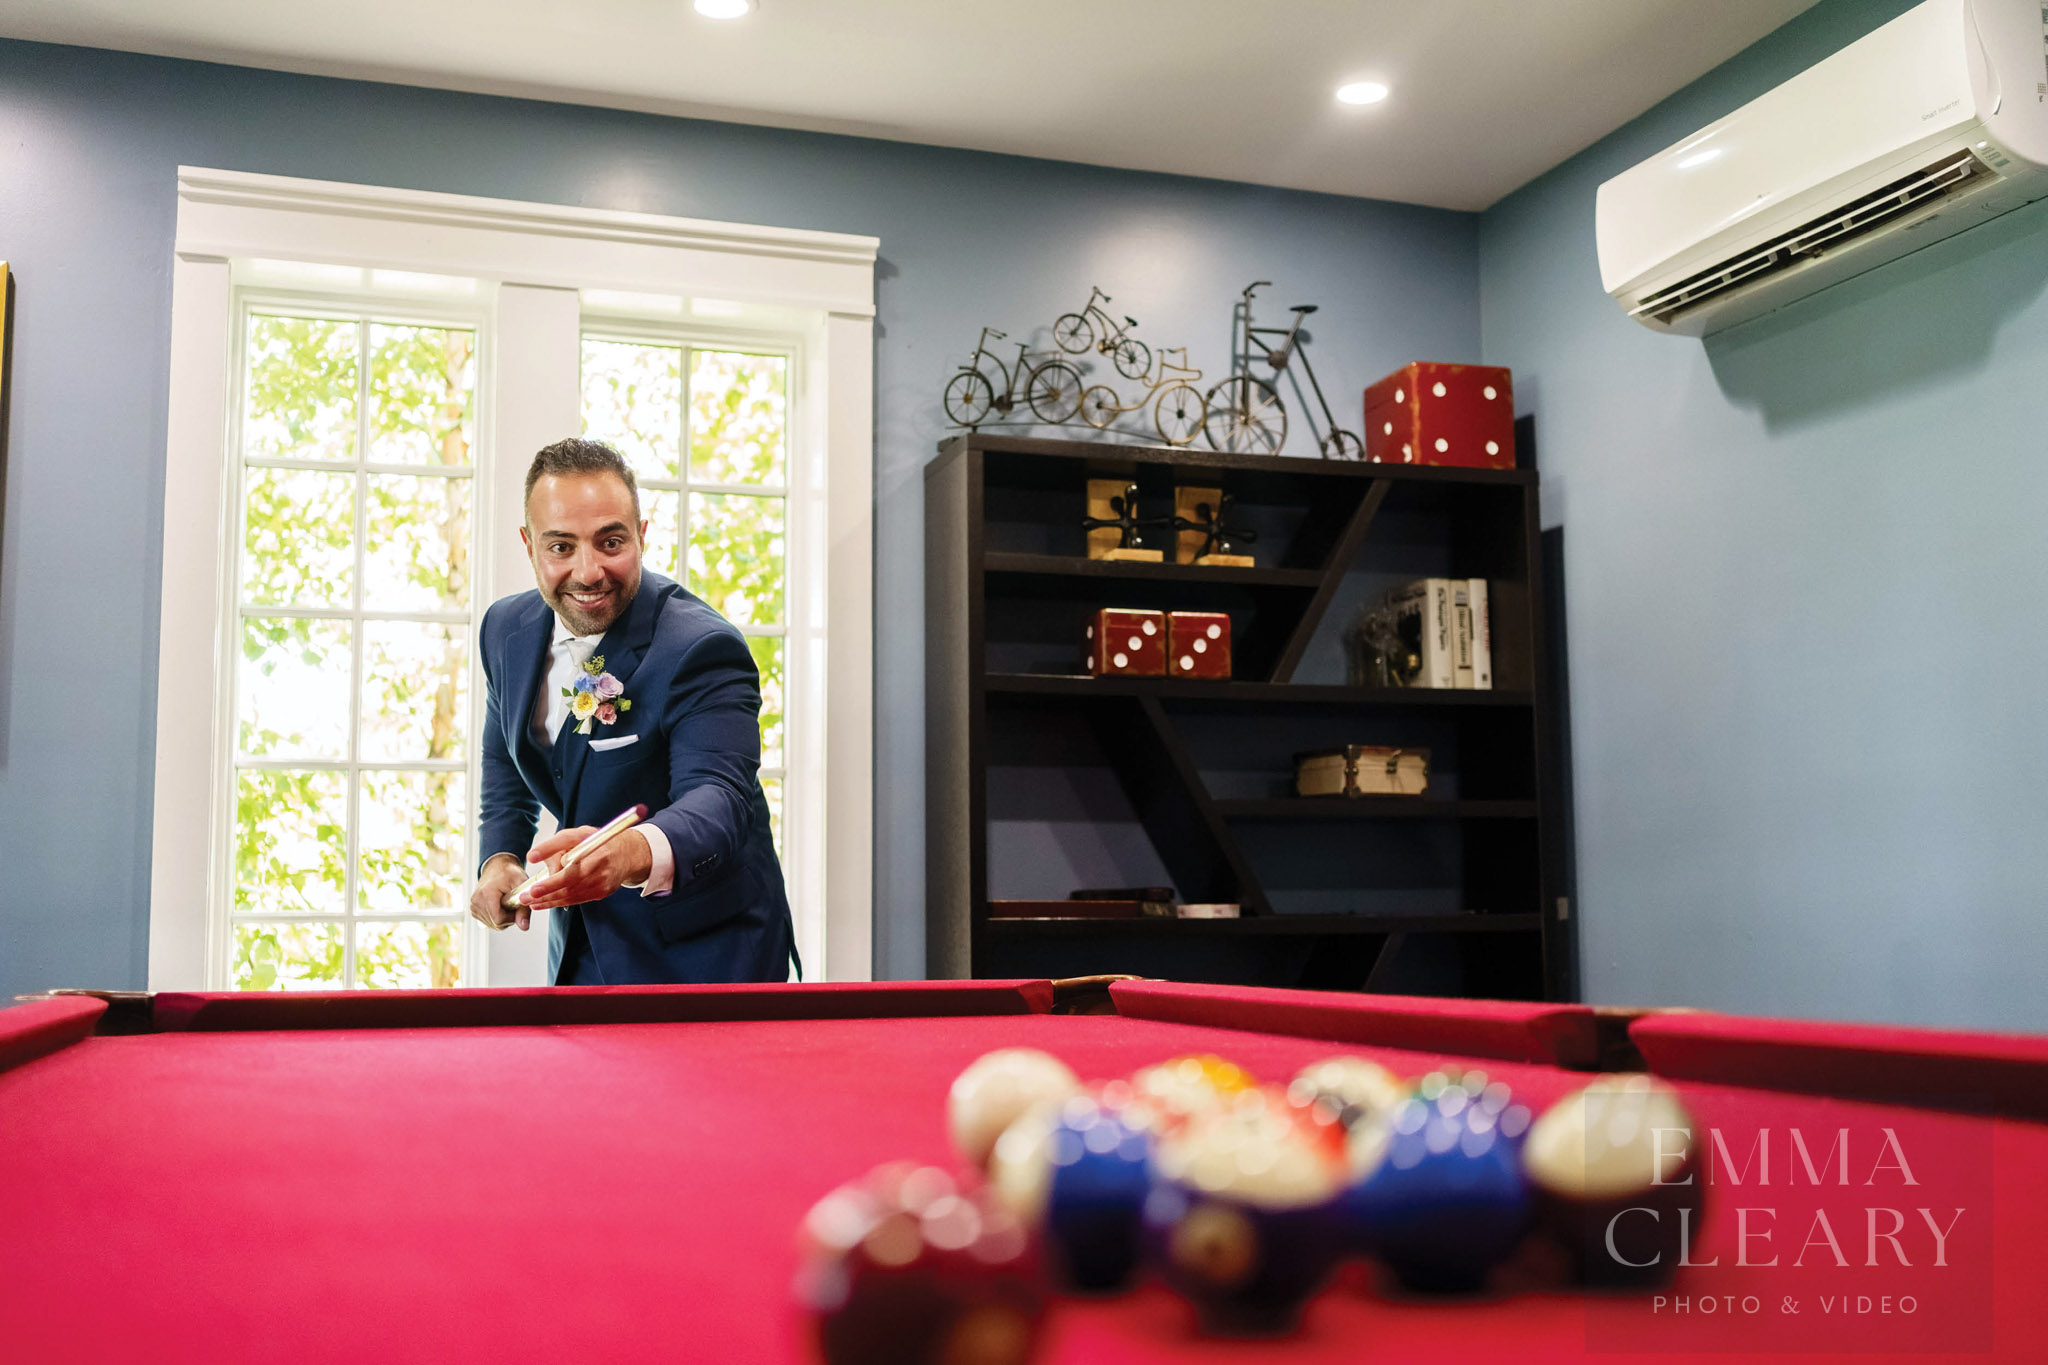 The groom is playing billiards